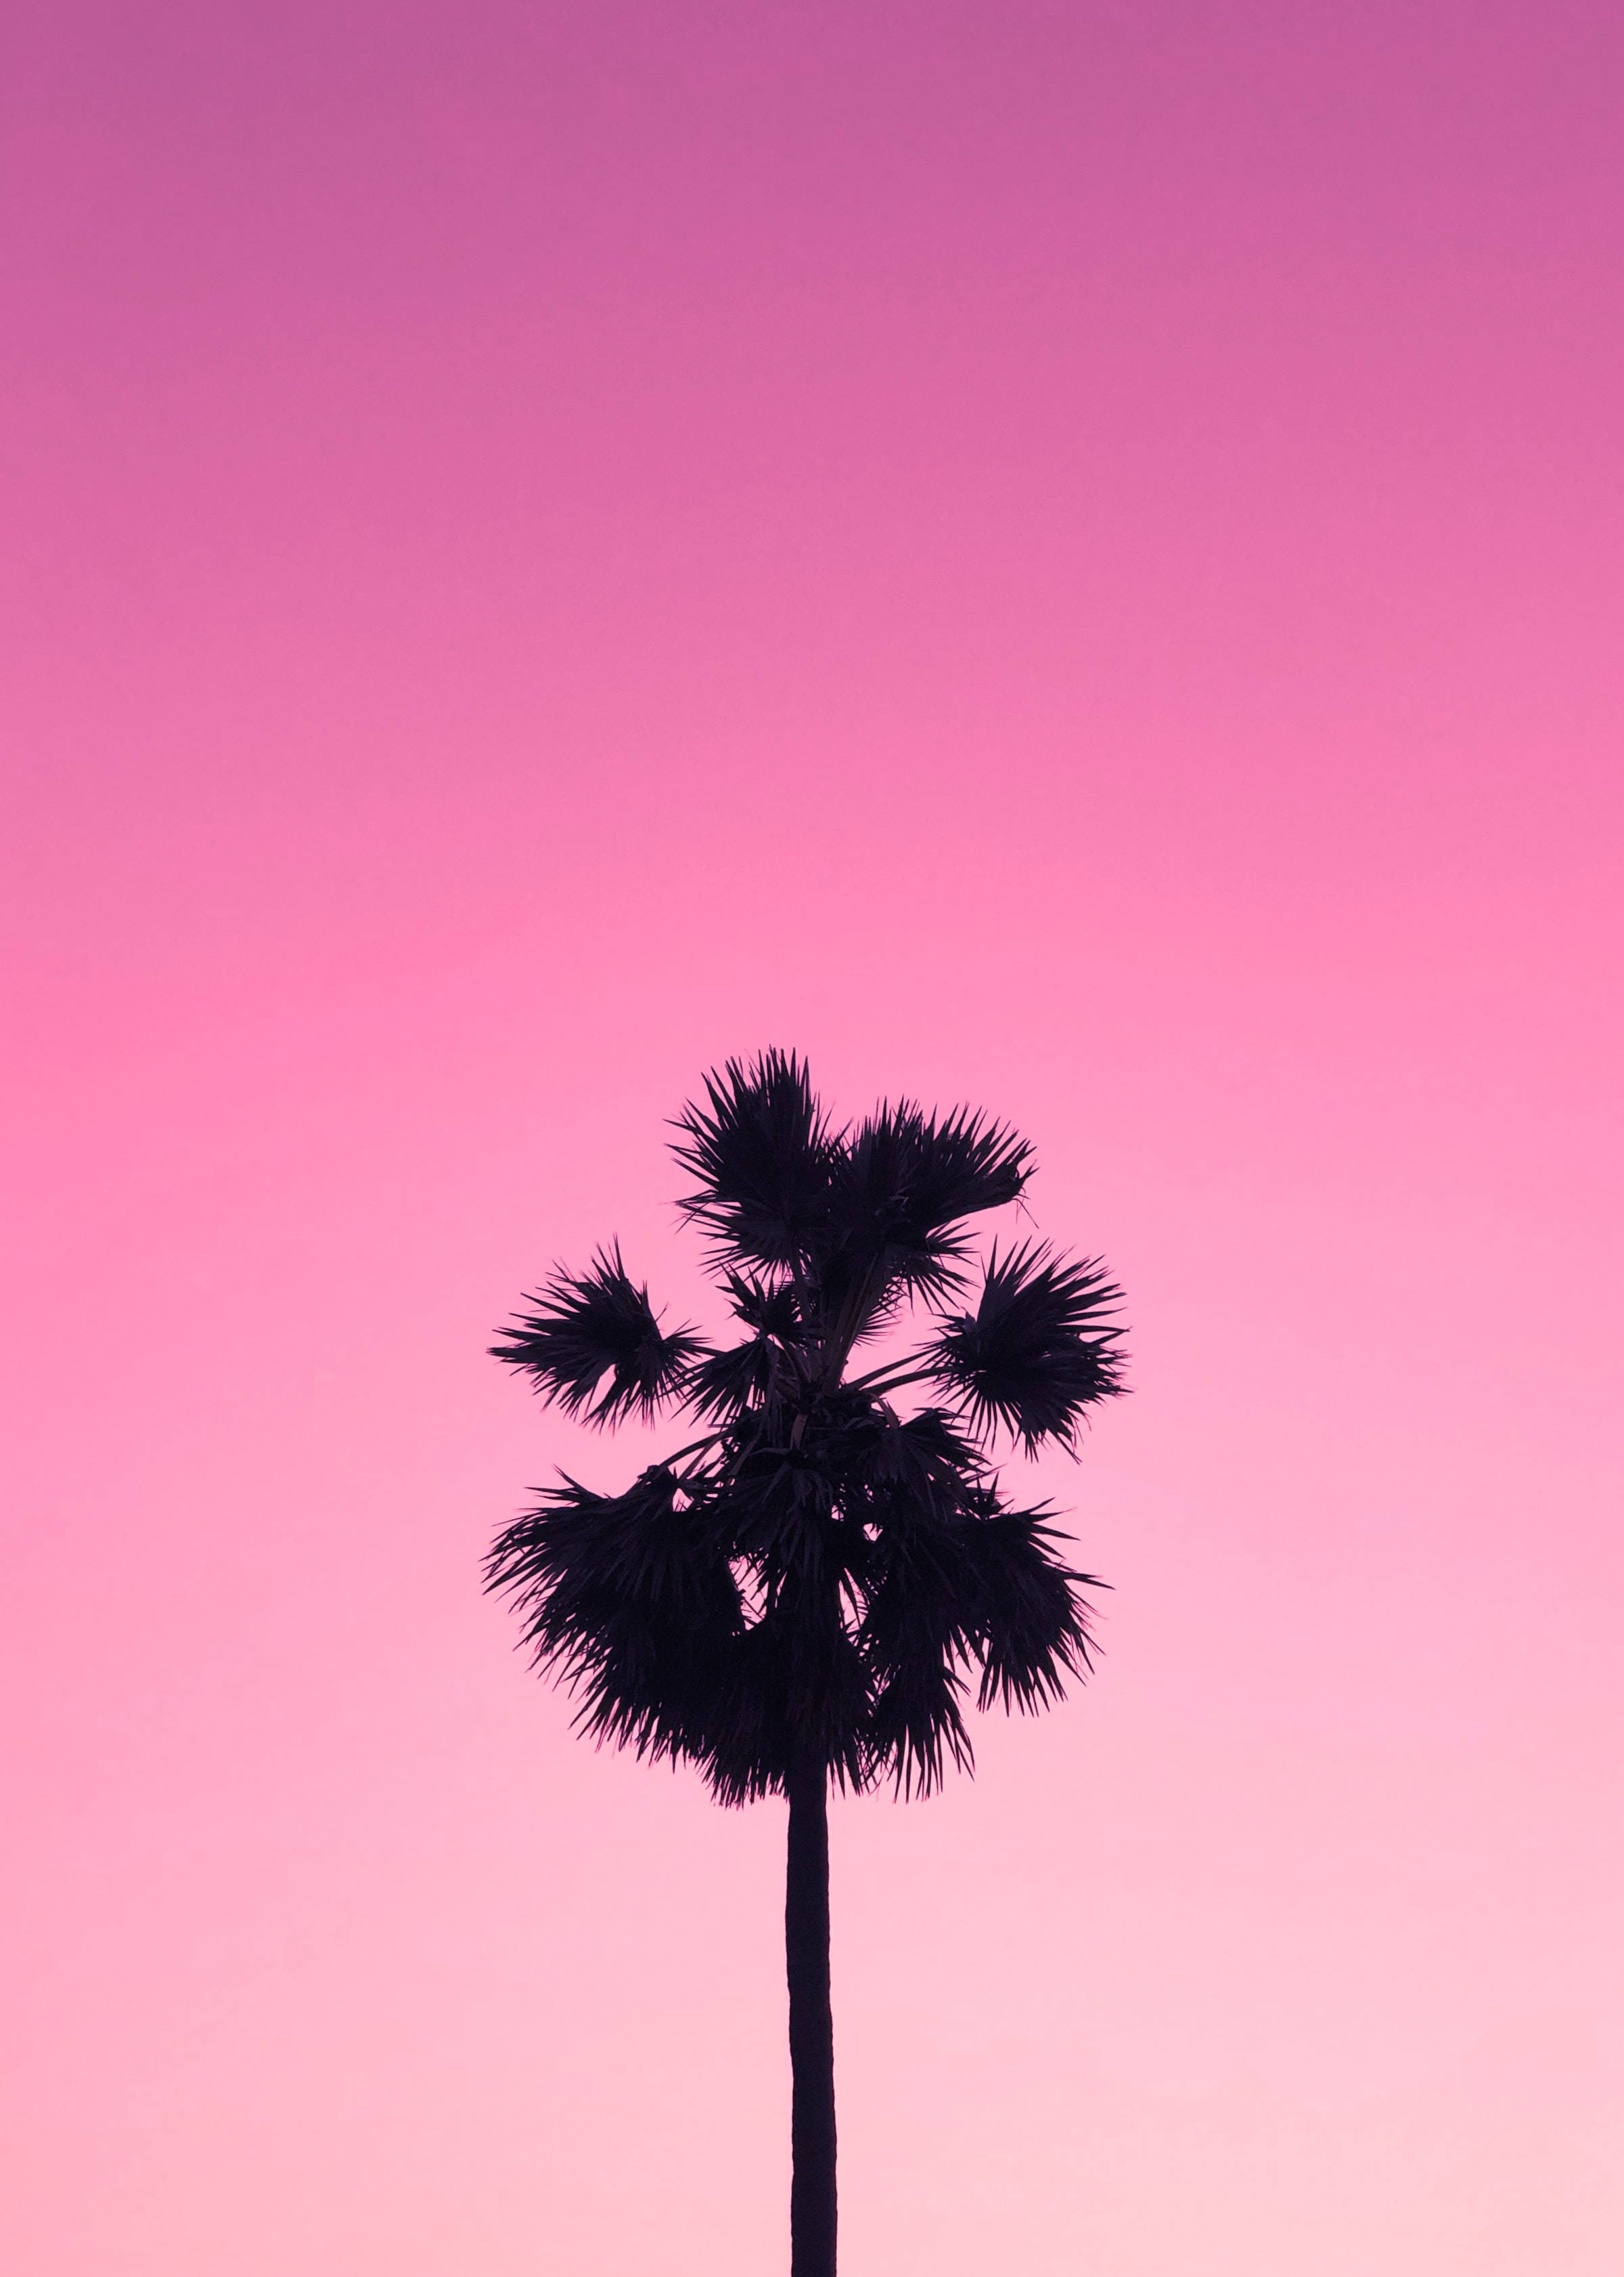 Cute Pink Aesthetic Sky Tree Silhouette Background